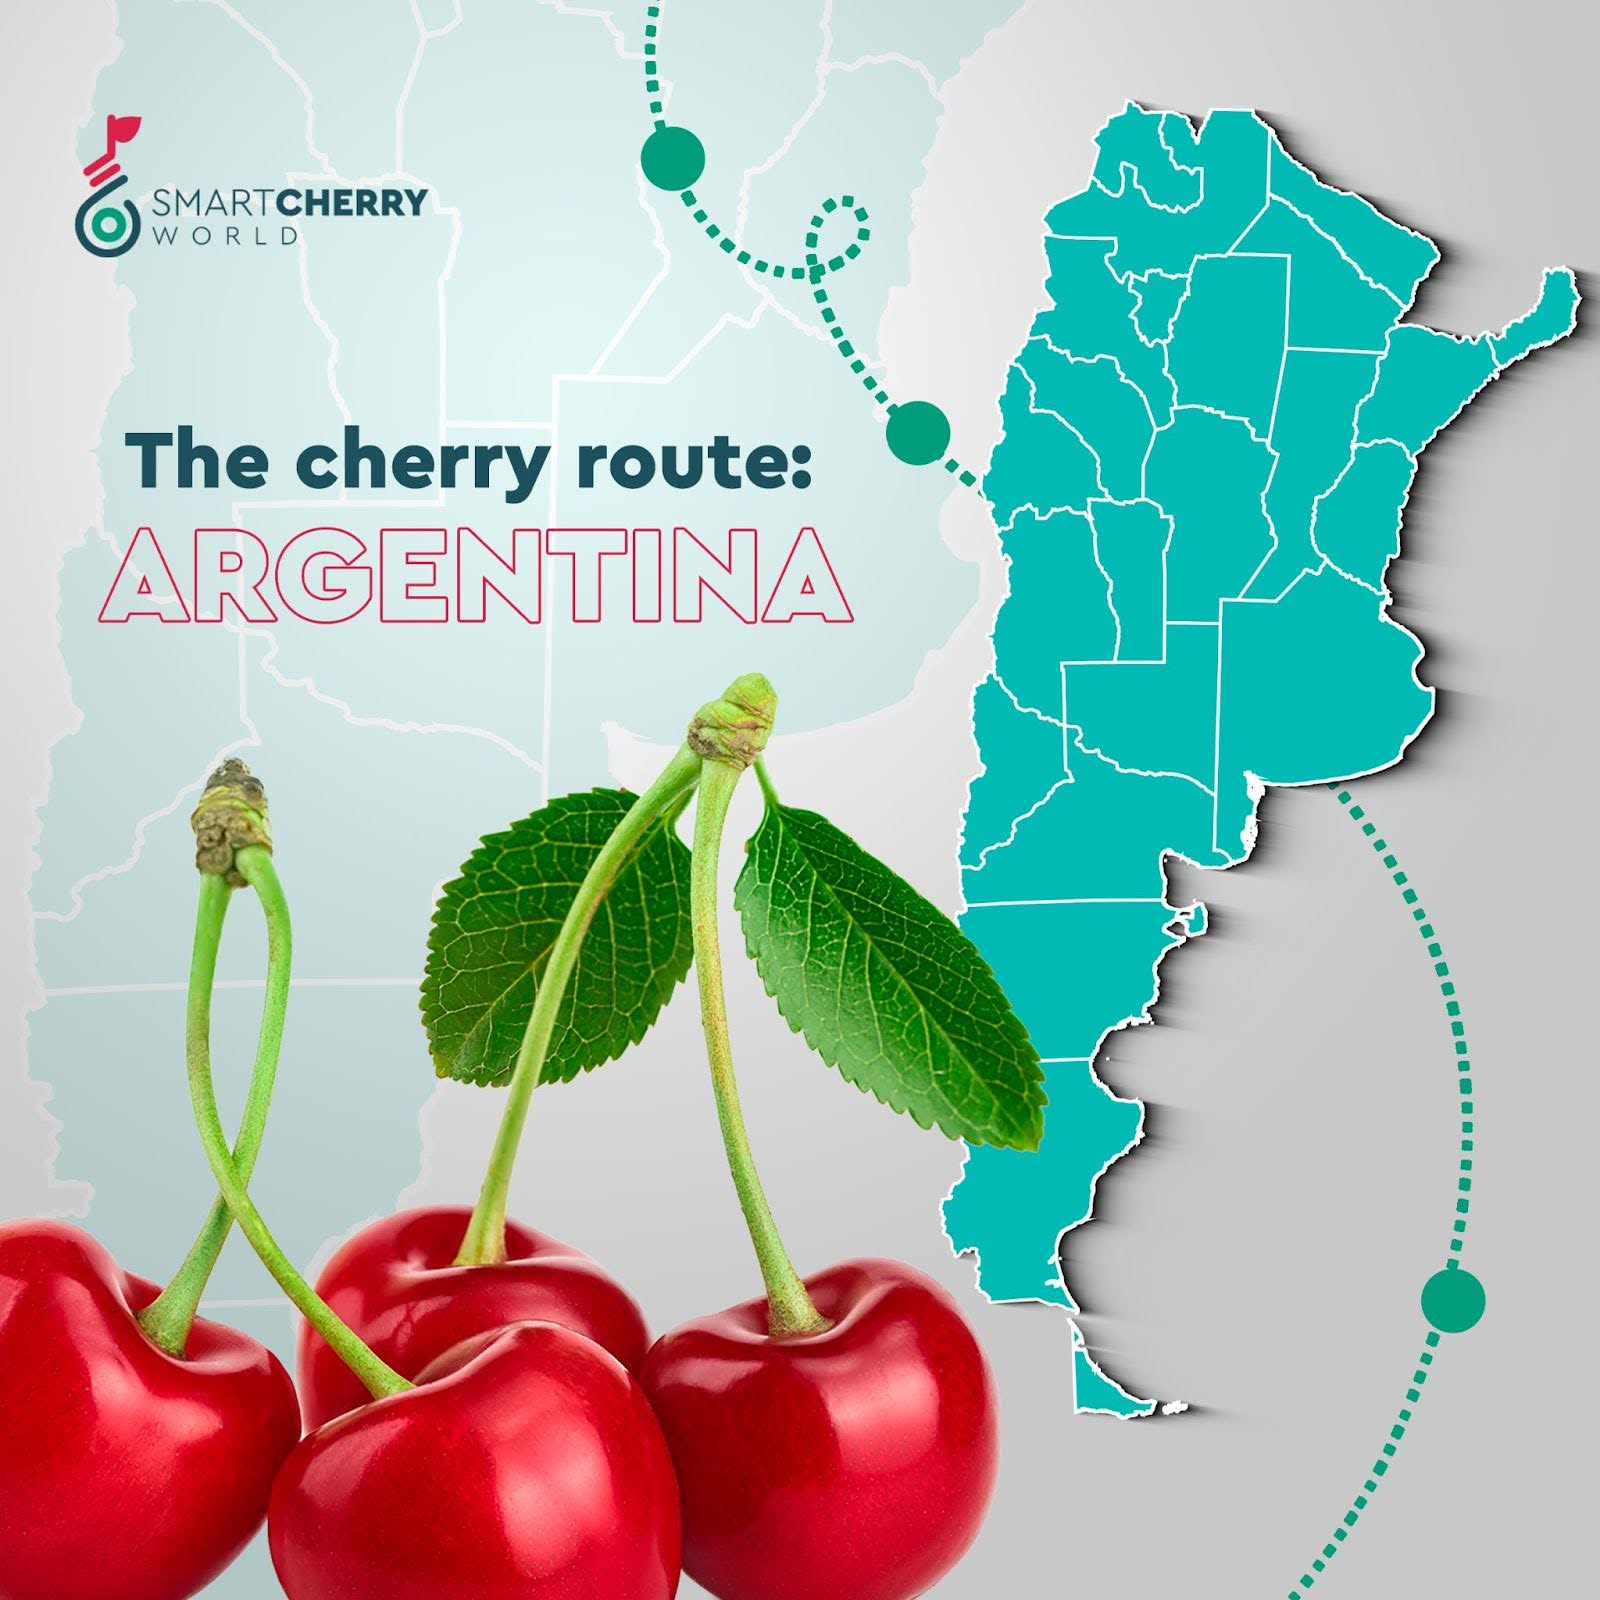 The Cherry Route: Argentina